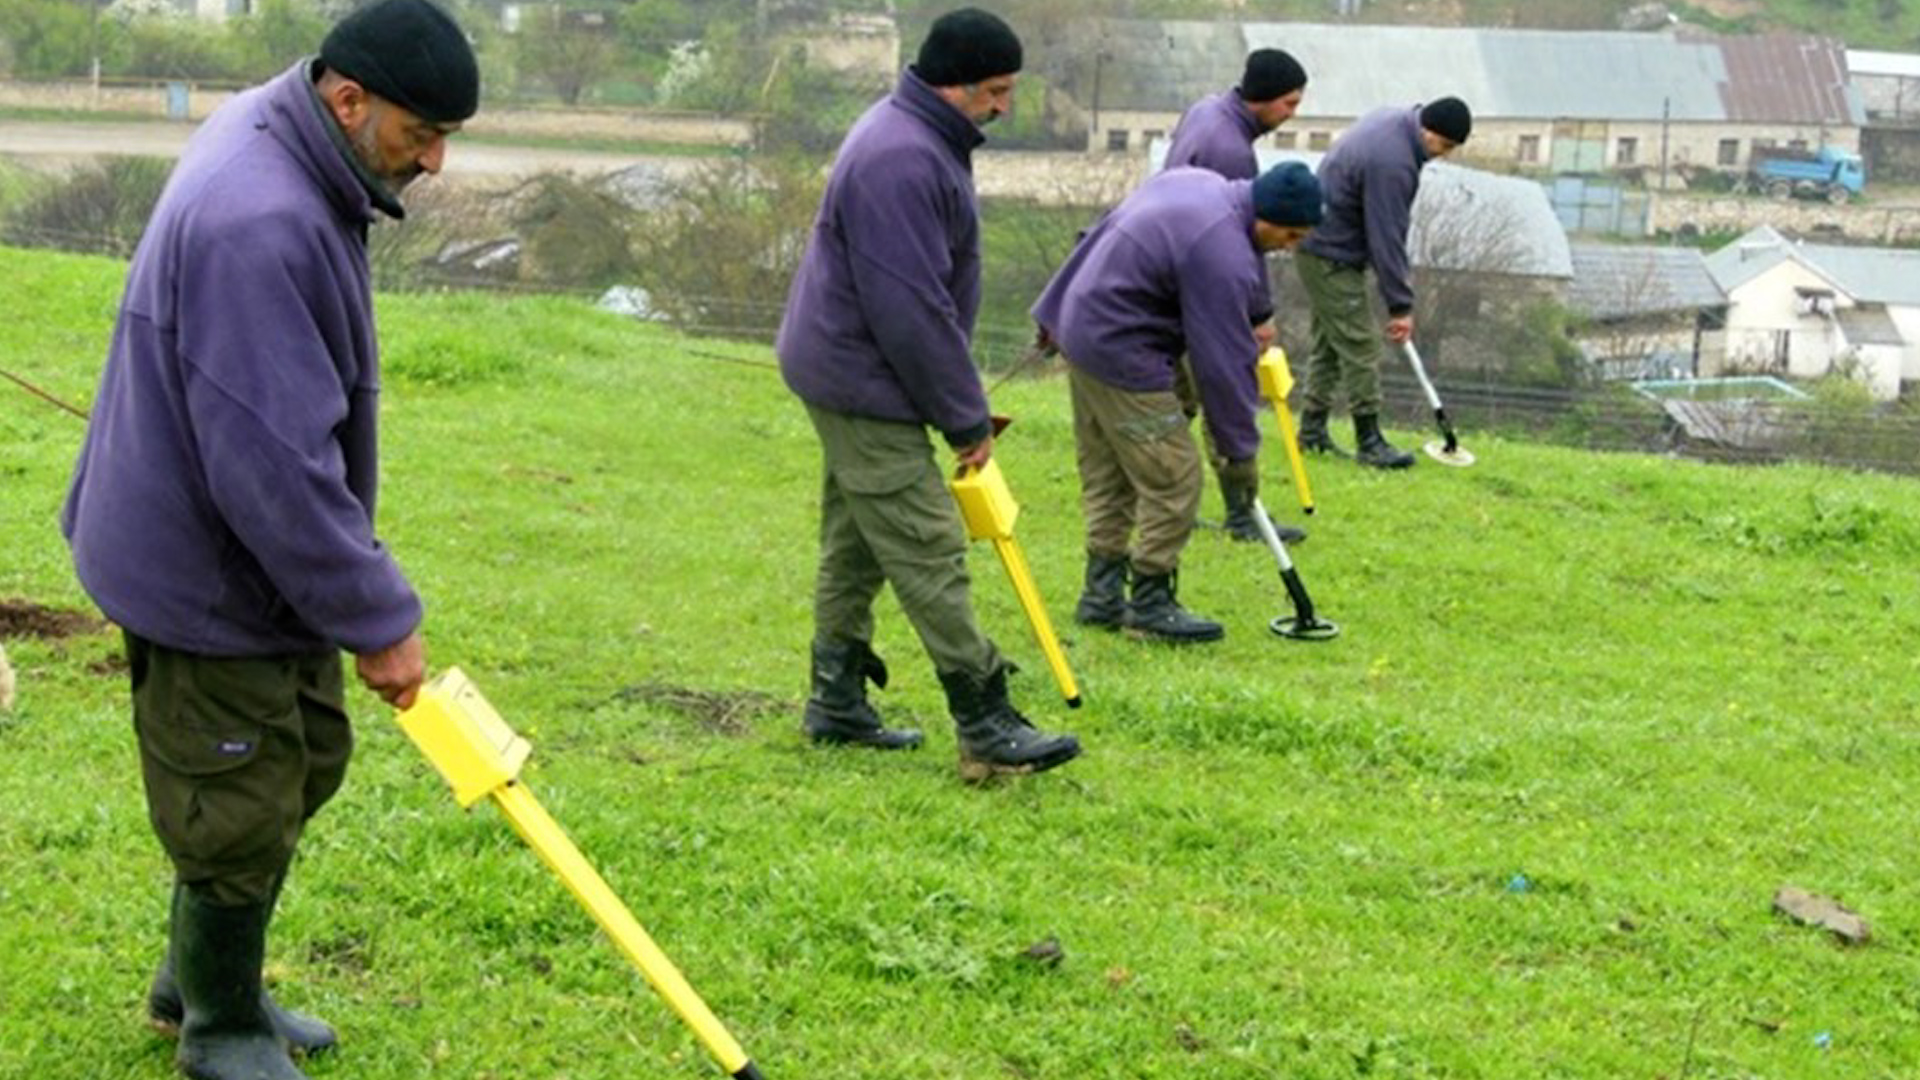 30 years on, HALO Trust continues clearing landmines in Karabakh